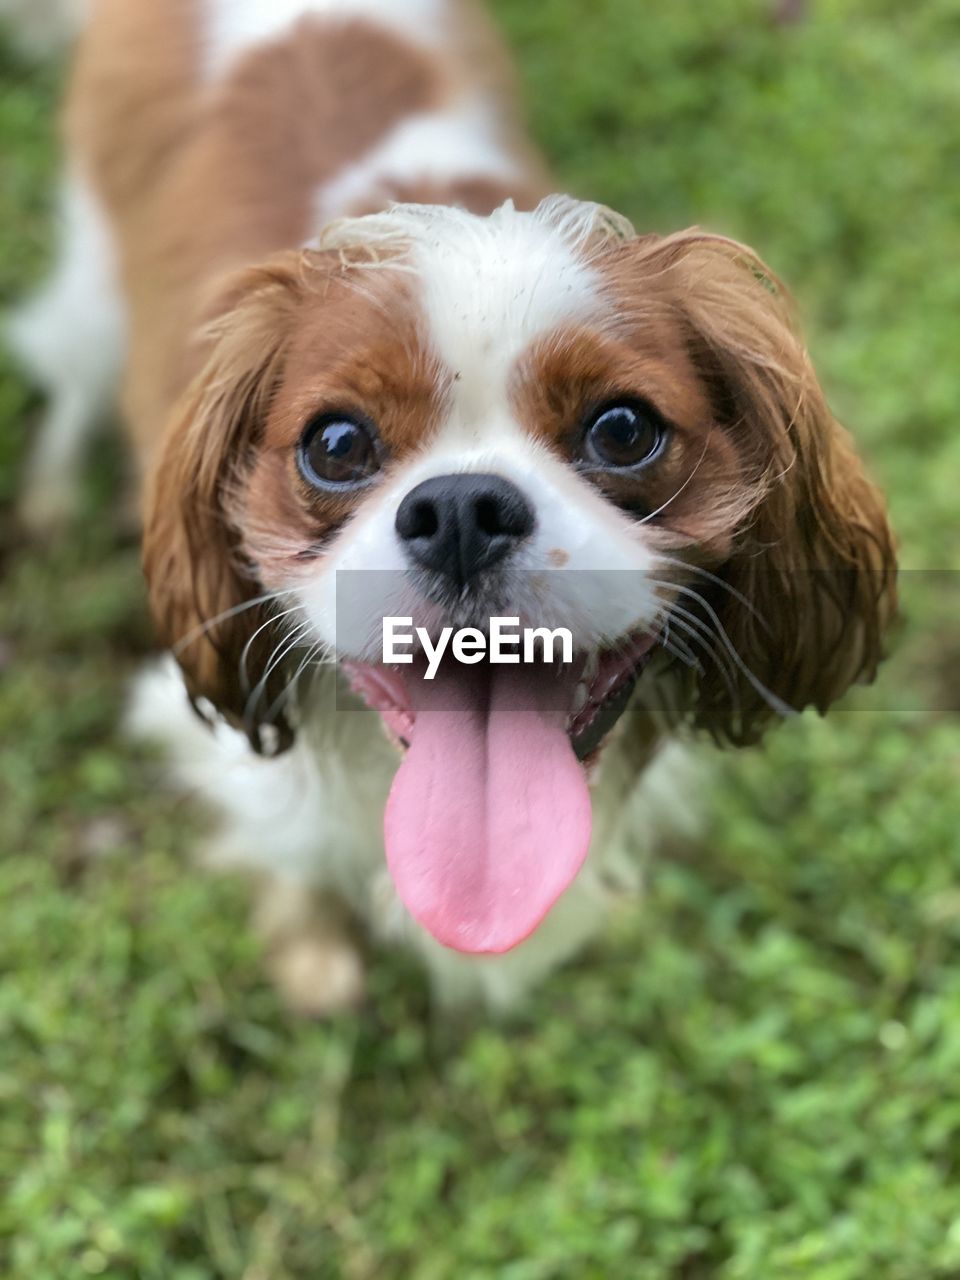 Cavalier king charles spaniel. tail wagging, tongues out, kind of day. 